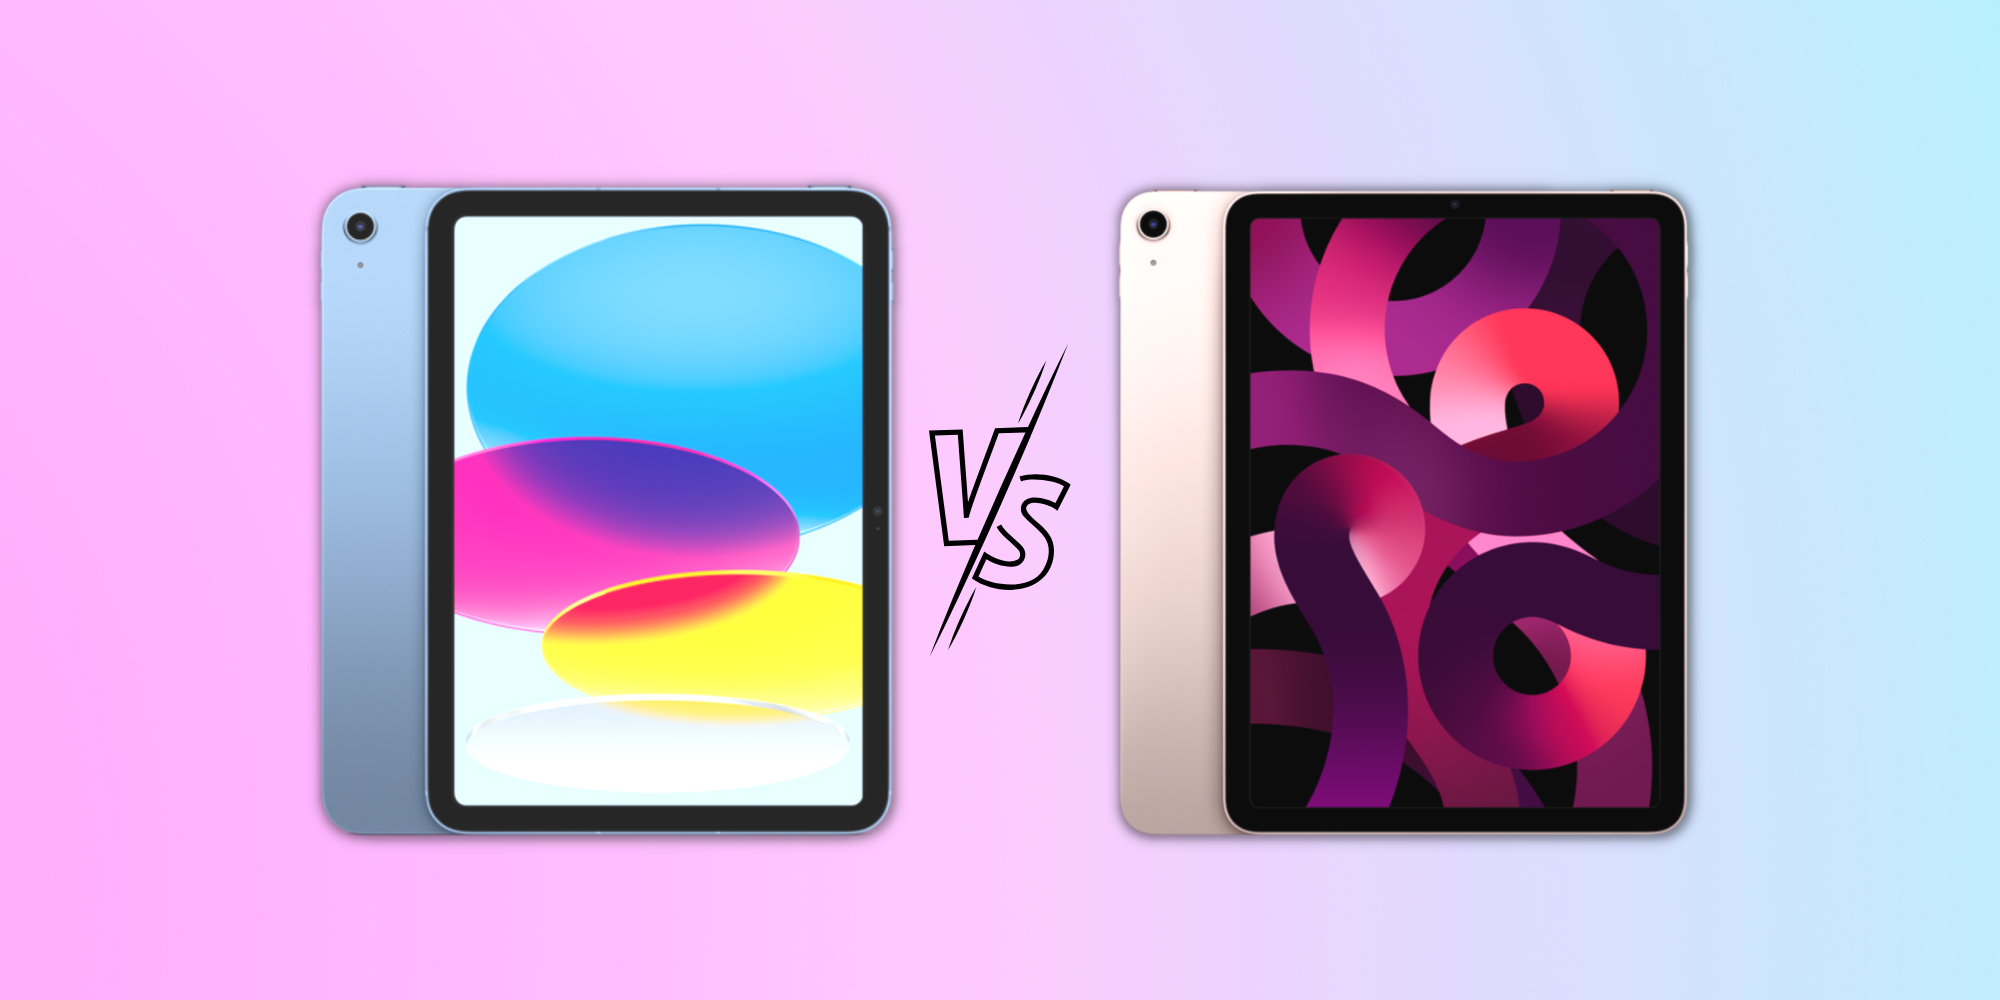 iPad (10th Gen) Vs. iPad Air (5th Gen): What’s the Difference?